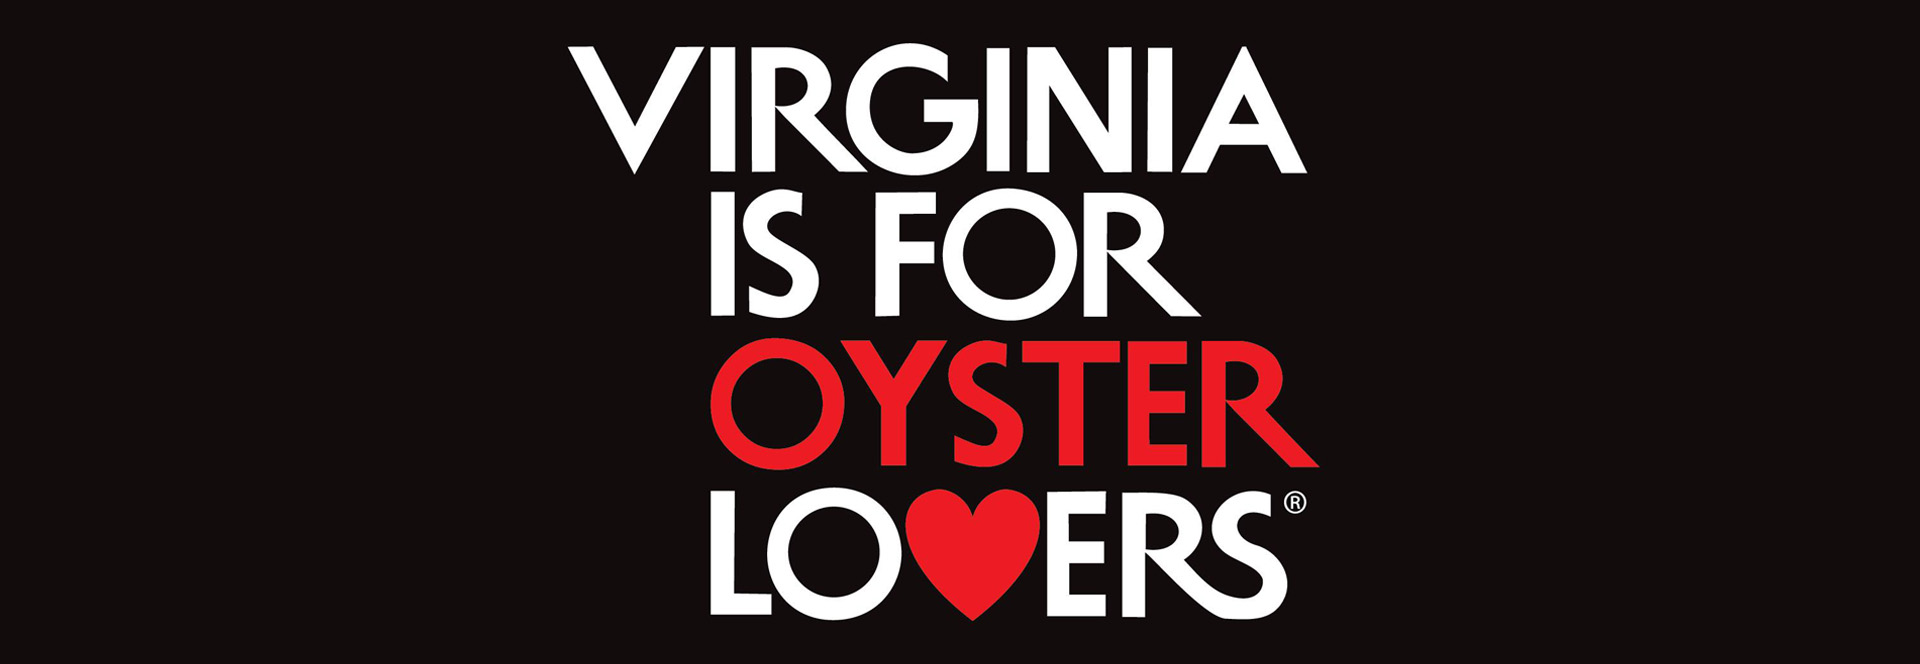 Virginia is for oyster lovers